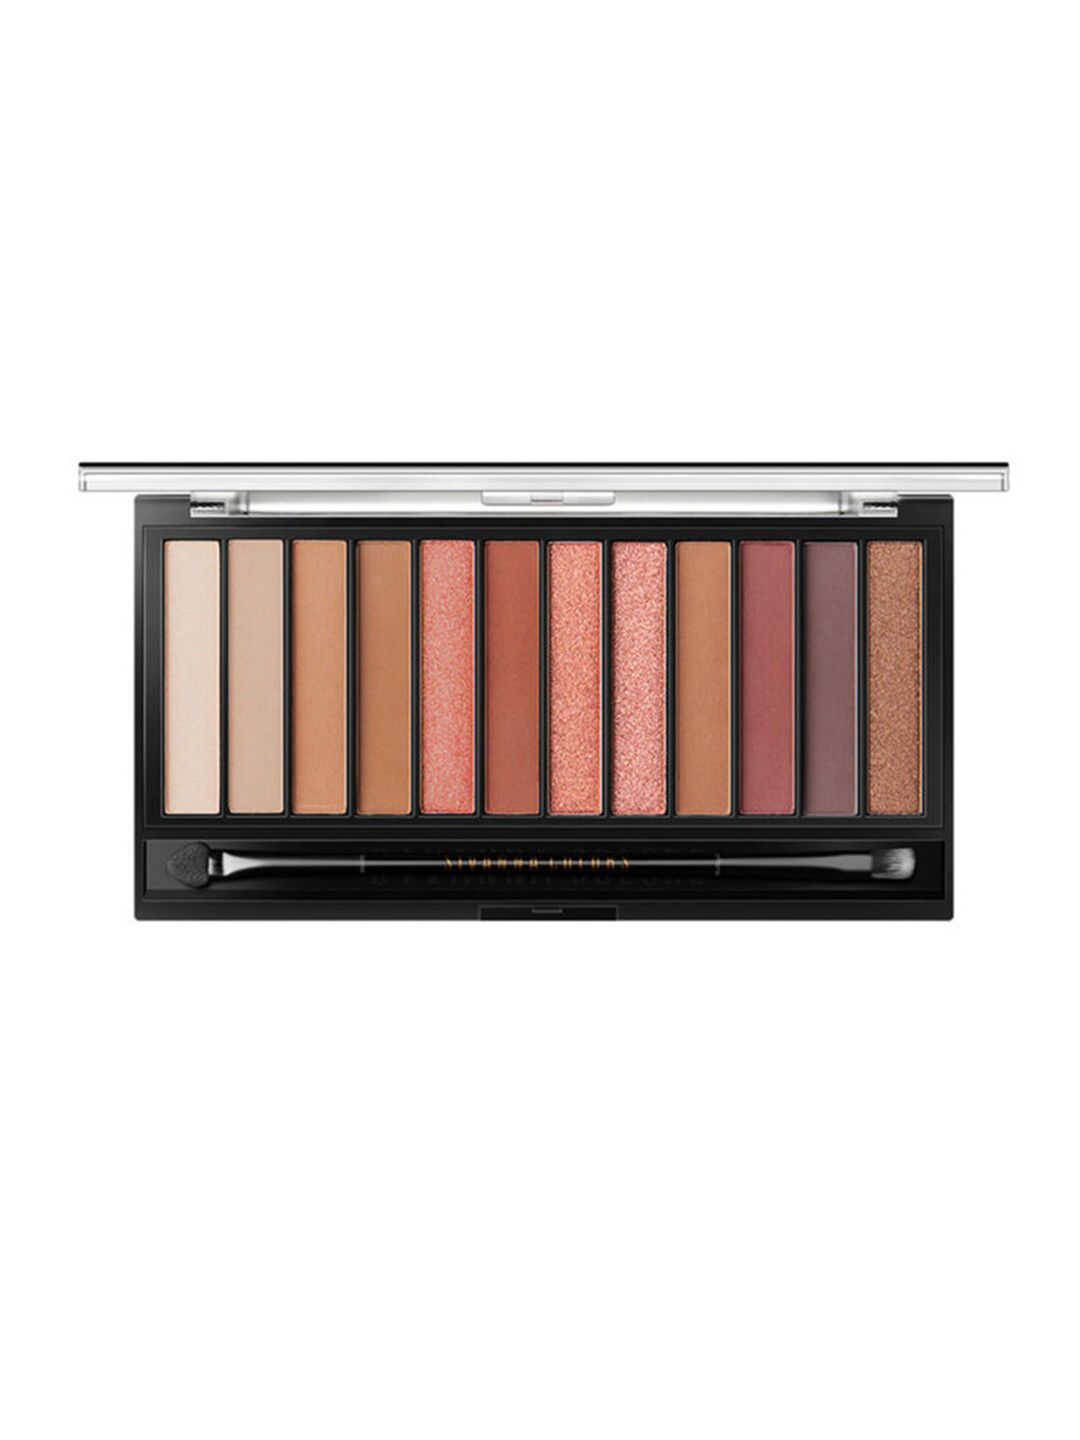 Sivanna Colors Make Up Studio Deluxe Eyeshadow Palette - HF202 04 Price in India